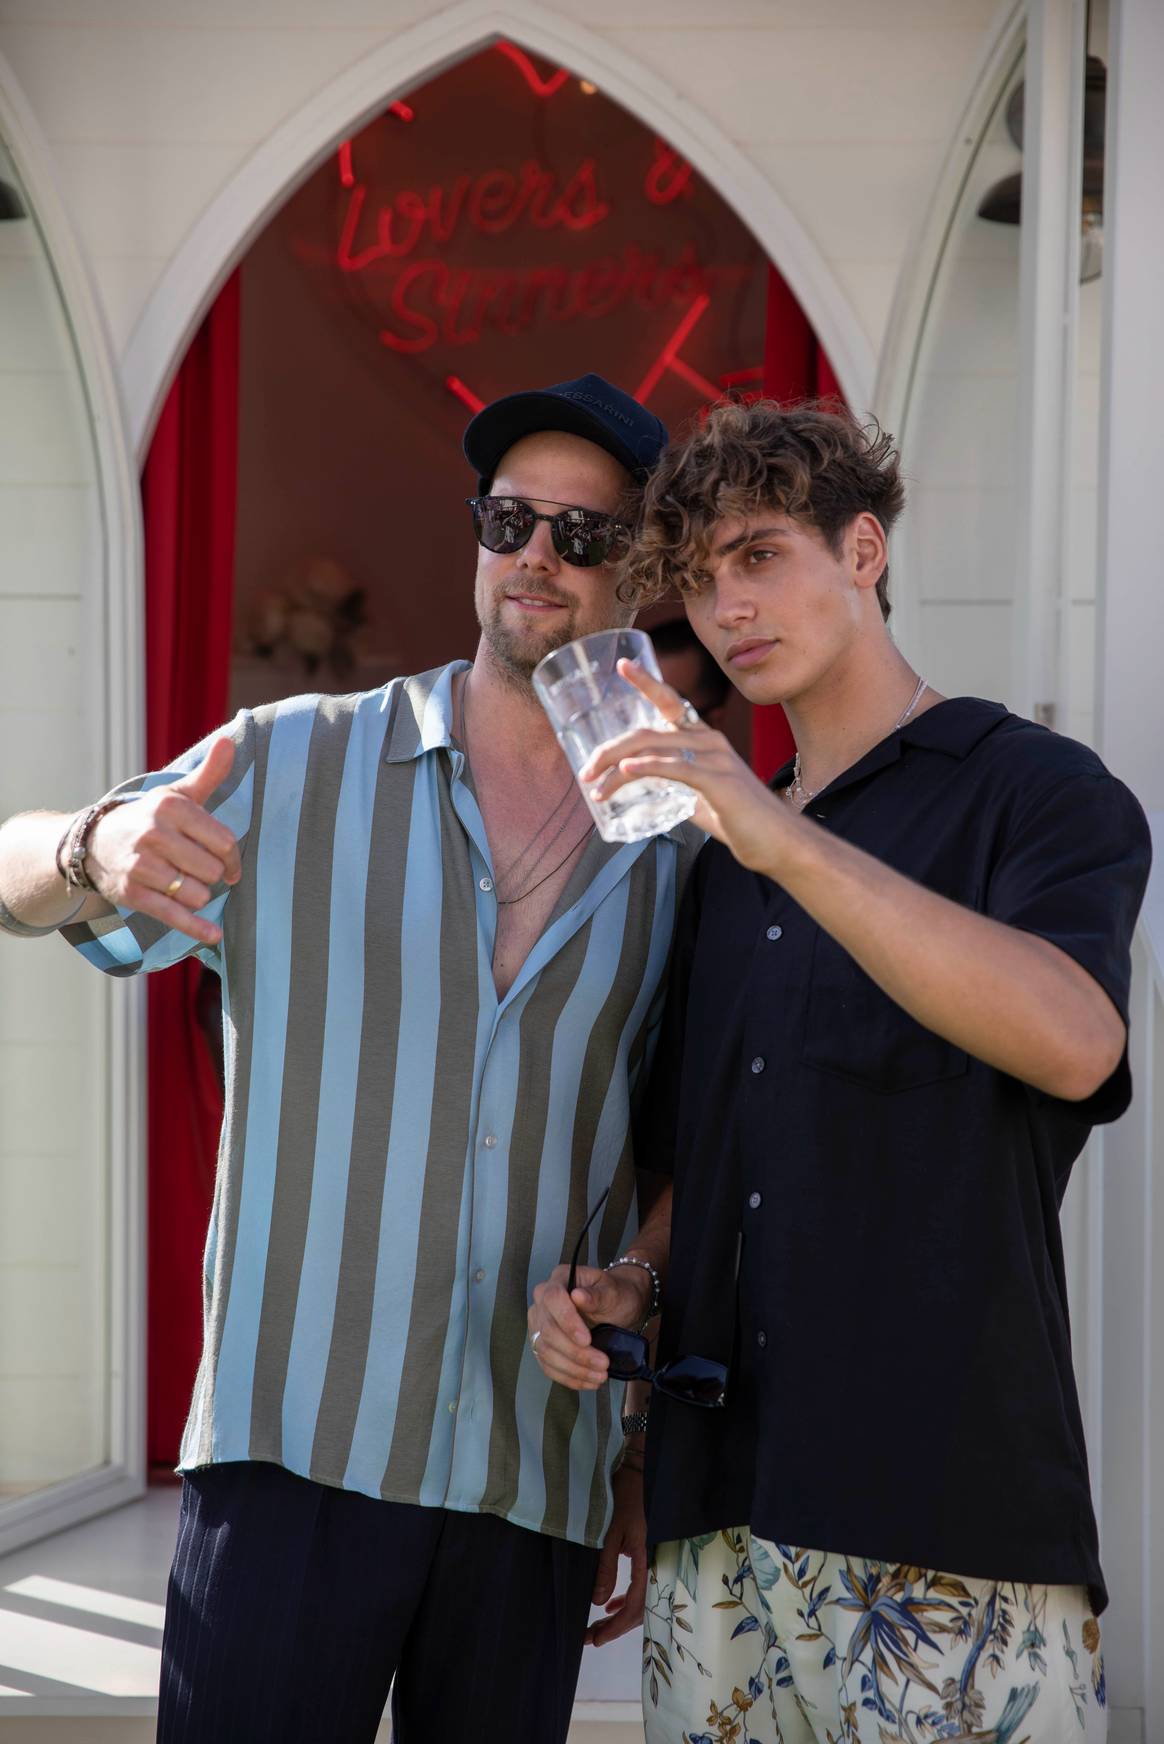 Florian Wortmann (left) with influencer Bene Schulz (right)
during the event in Ibiza. Image: Baldessarini